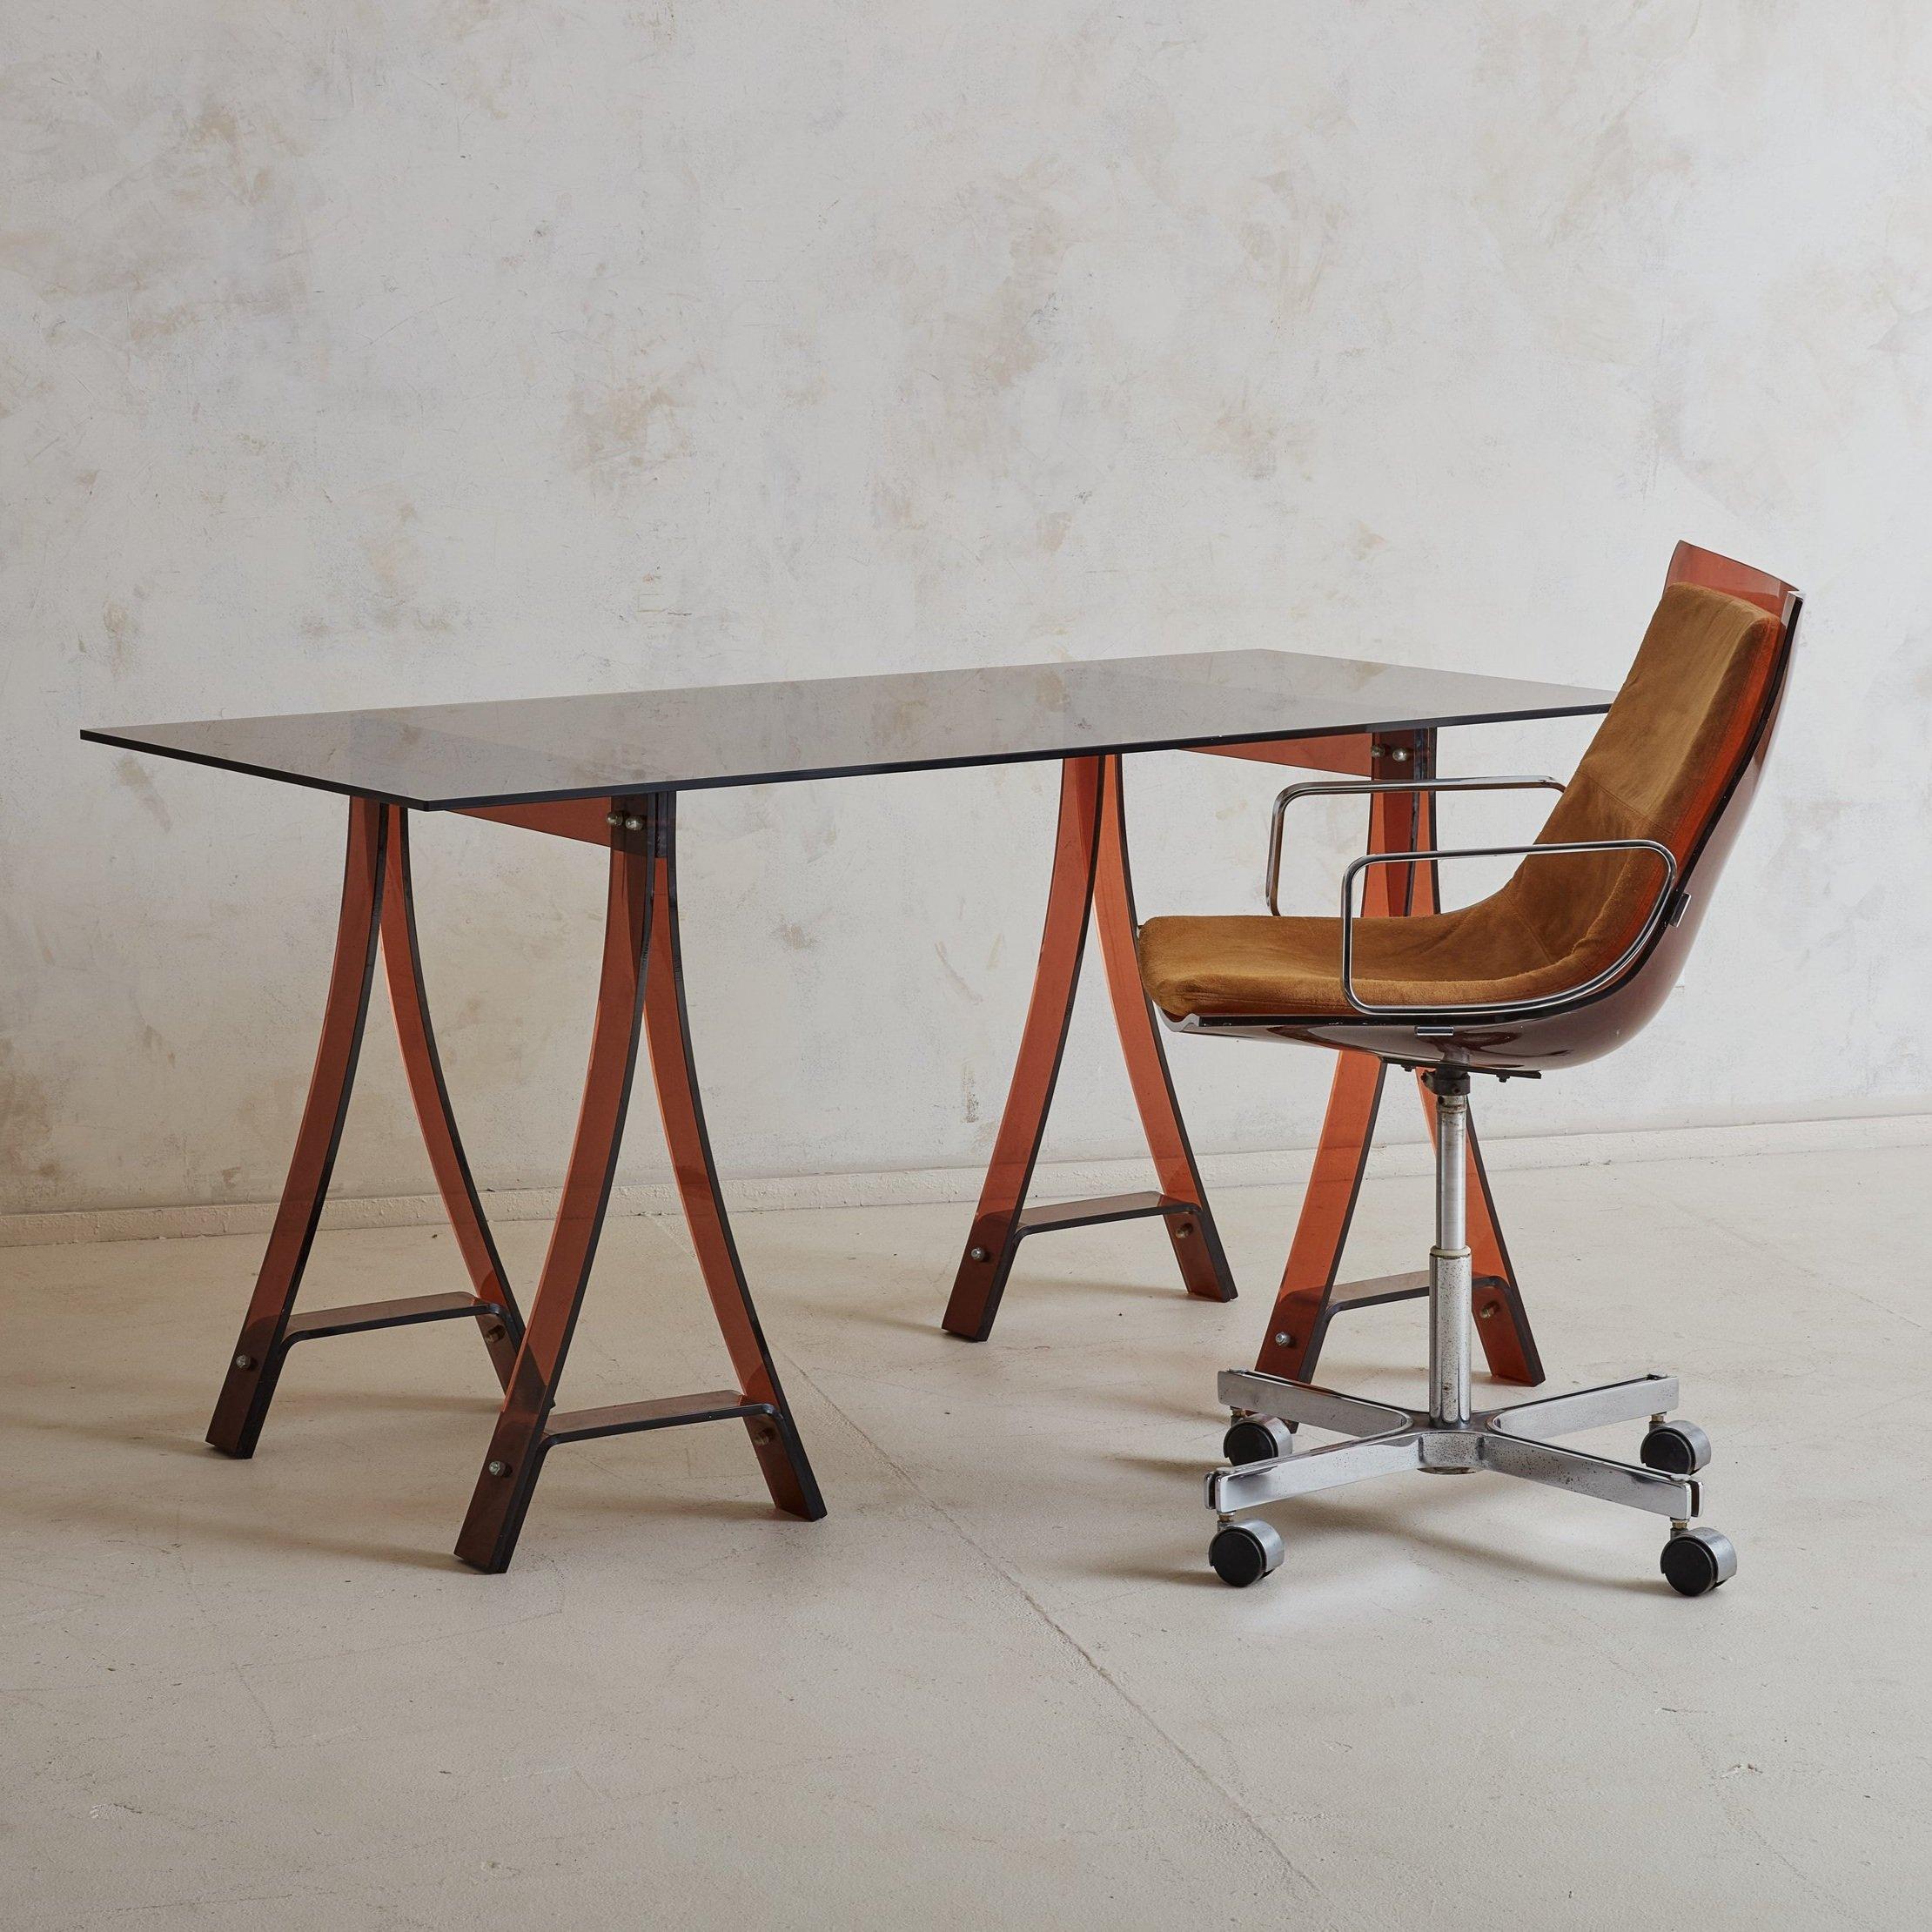 A gorgeous French desk or work table designed by Marcello Gacita + Pierre Tiberi in the 1970s. This piece features two amber plexiglass trestle legs with circular chrome hardware and a rectangular smoked glass top. Styled here with our Plexiglass